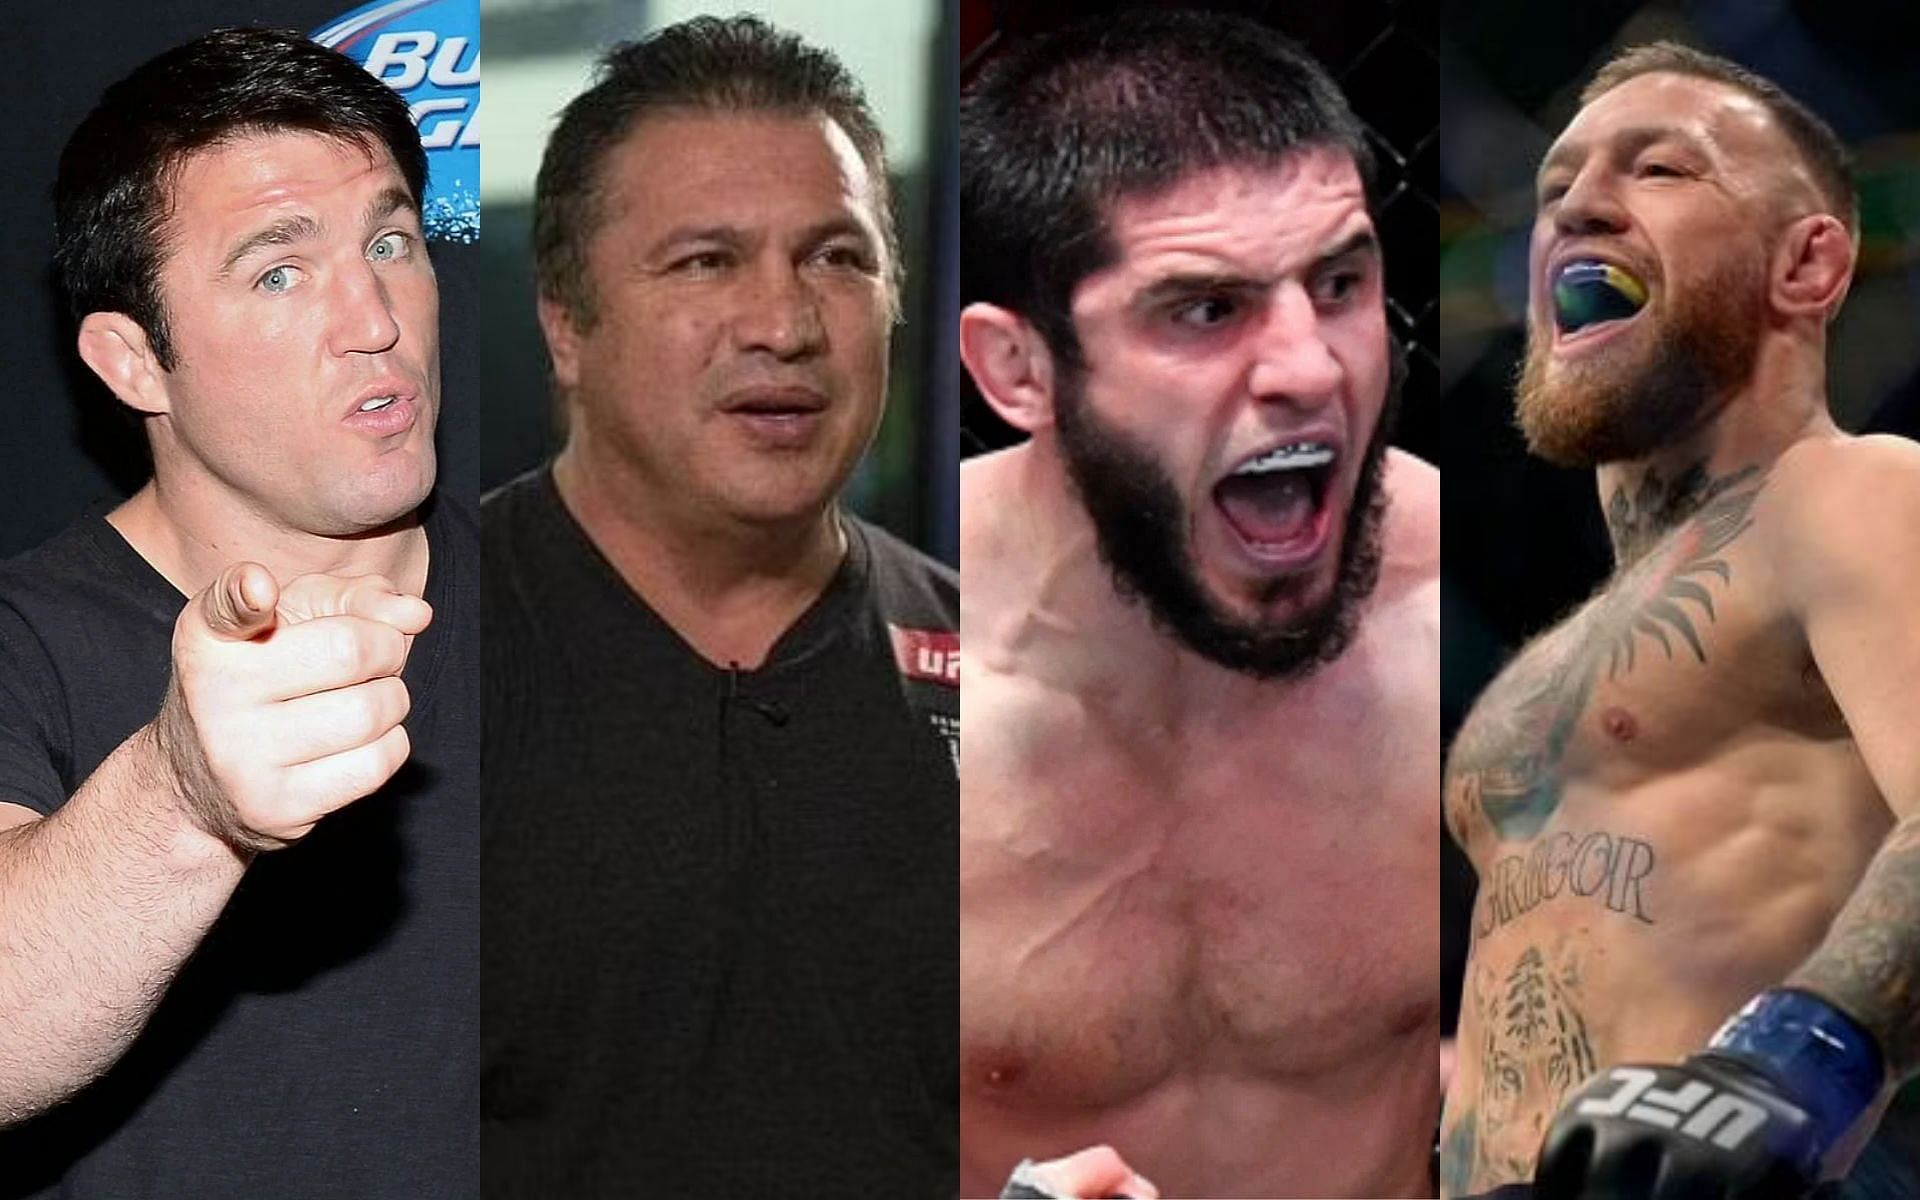 Chael Sonnen, Javier Mendez, Islam Makhachev, and Conor McGregor